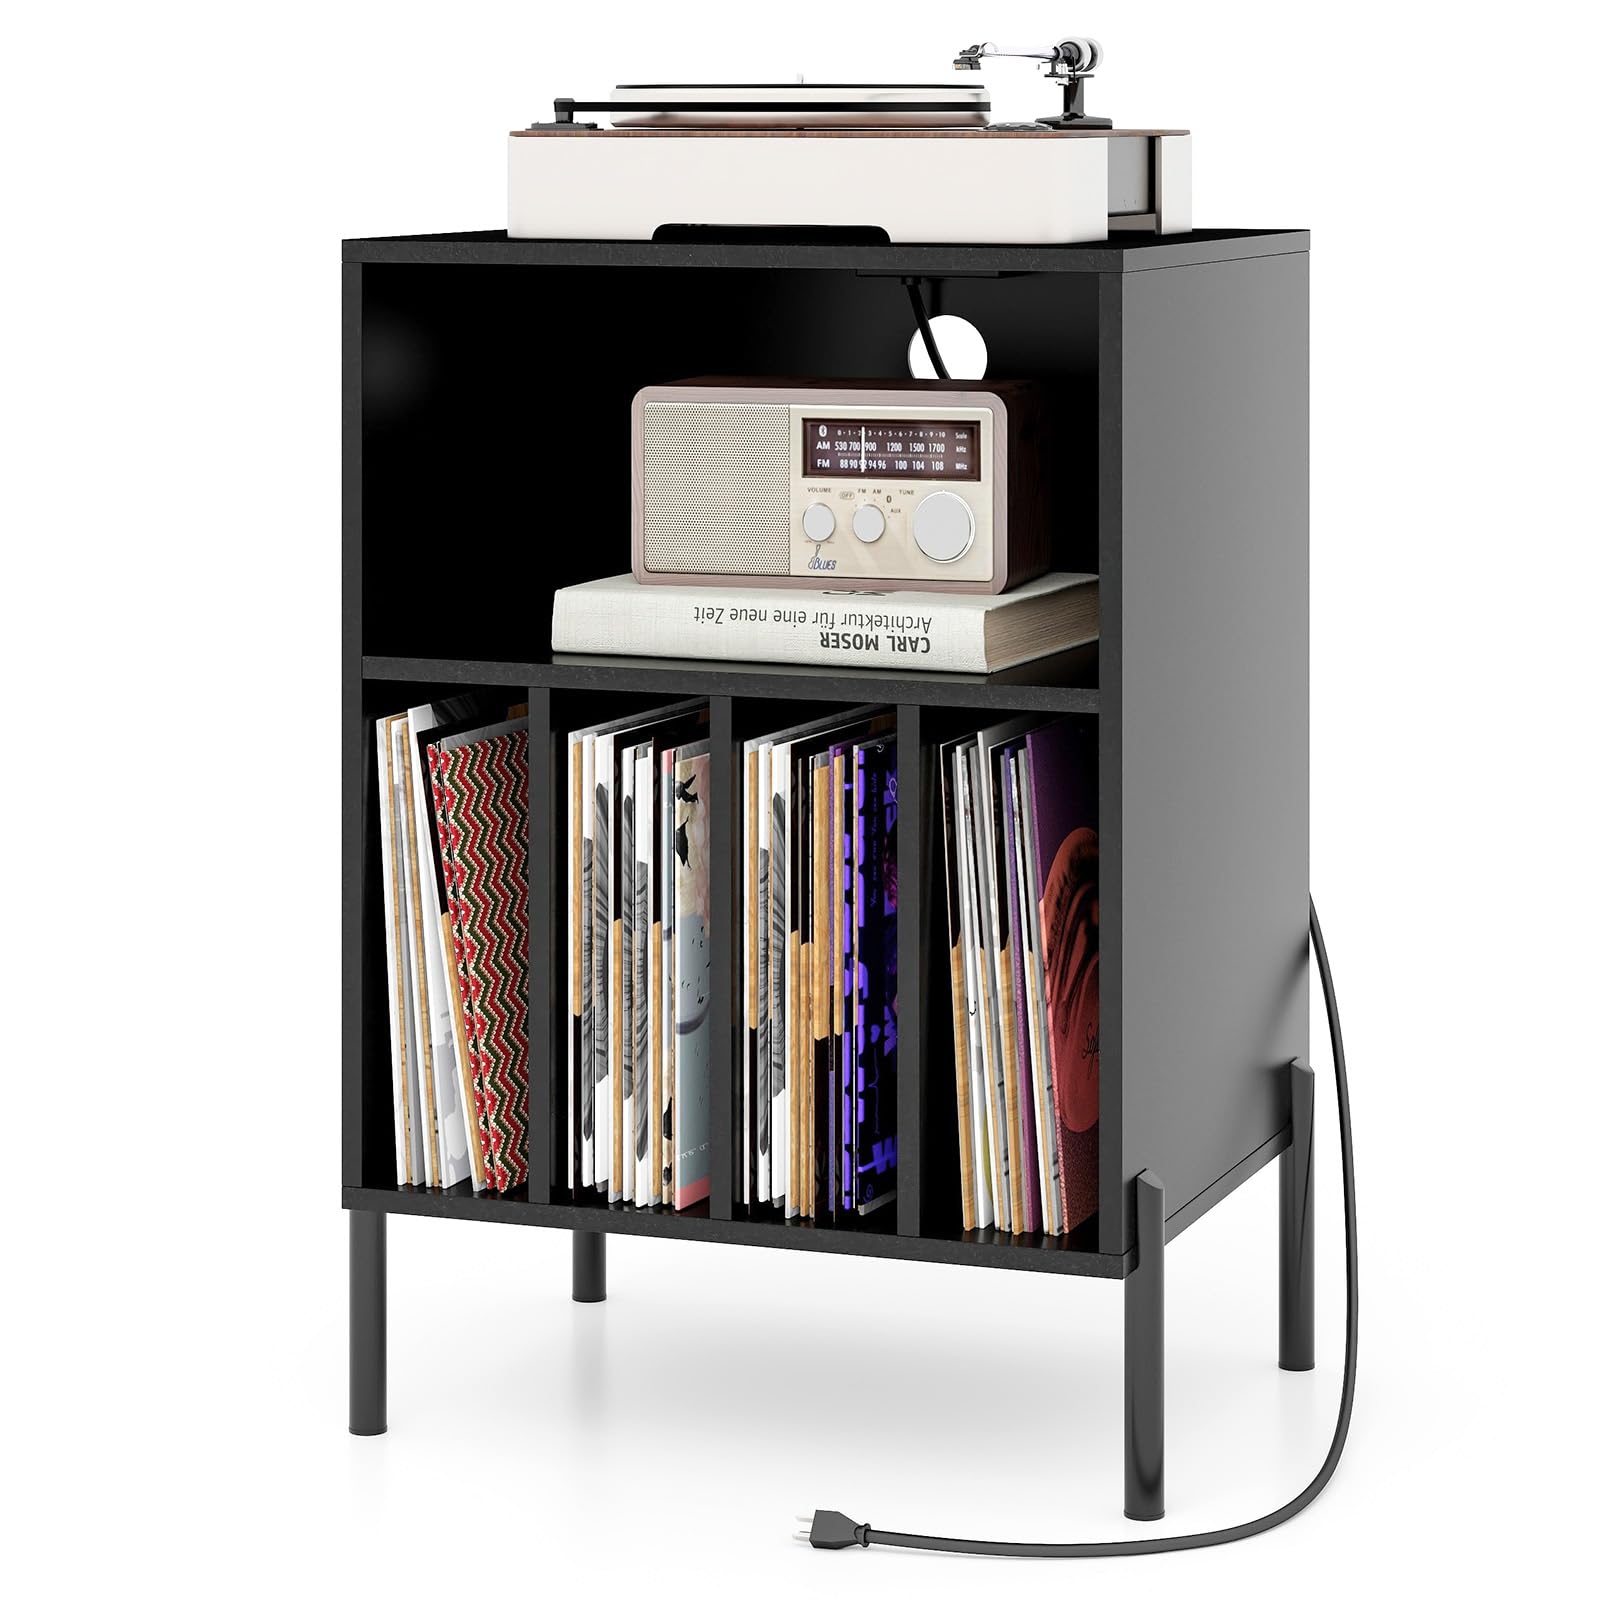 Giantex Record Player Stand with Charging Station